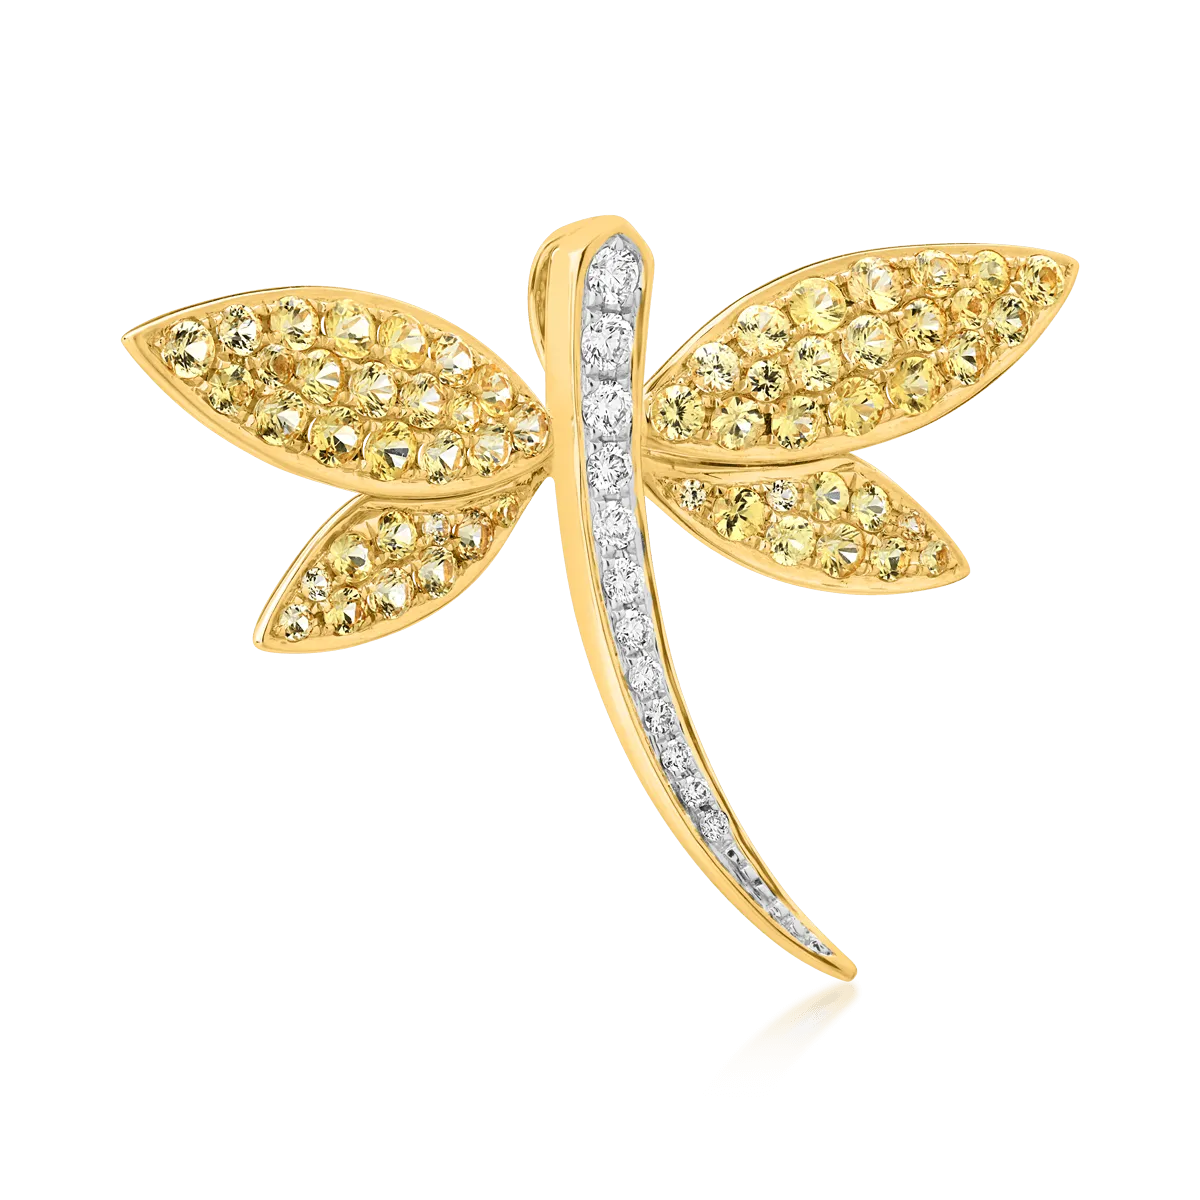 18K white-yellow gold brooch with 1.72ct yellow sapphires and 0.2ct diamonds